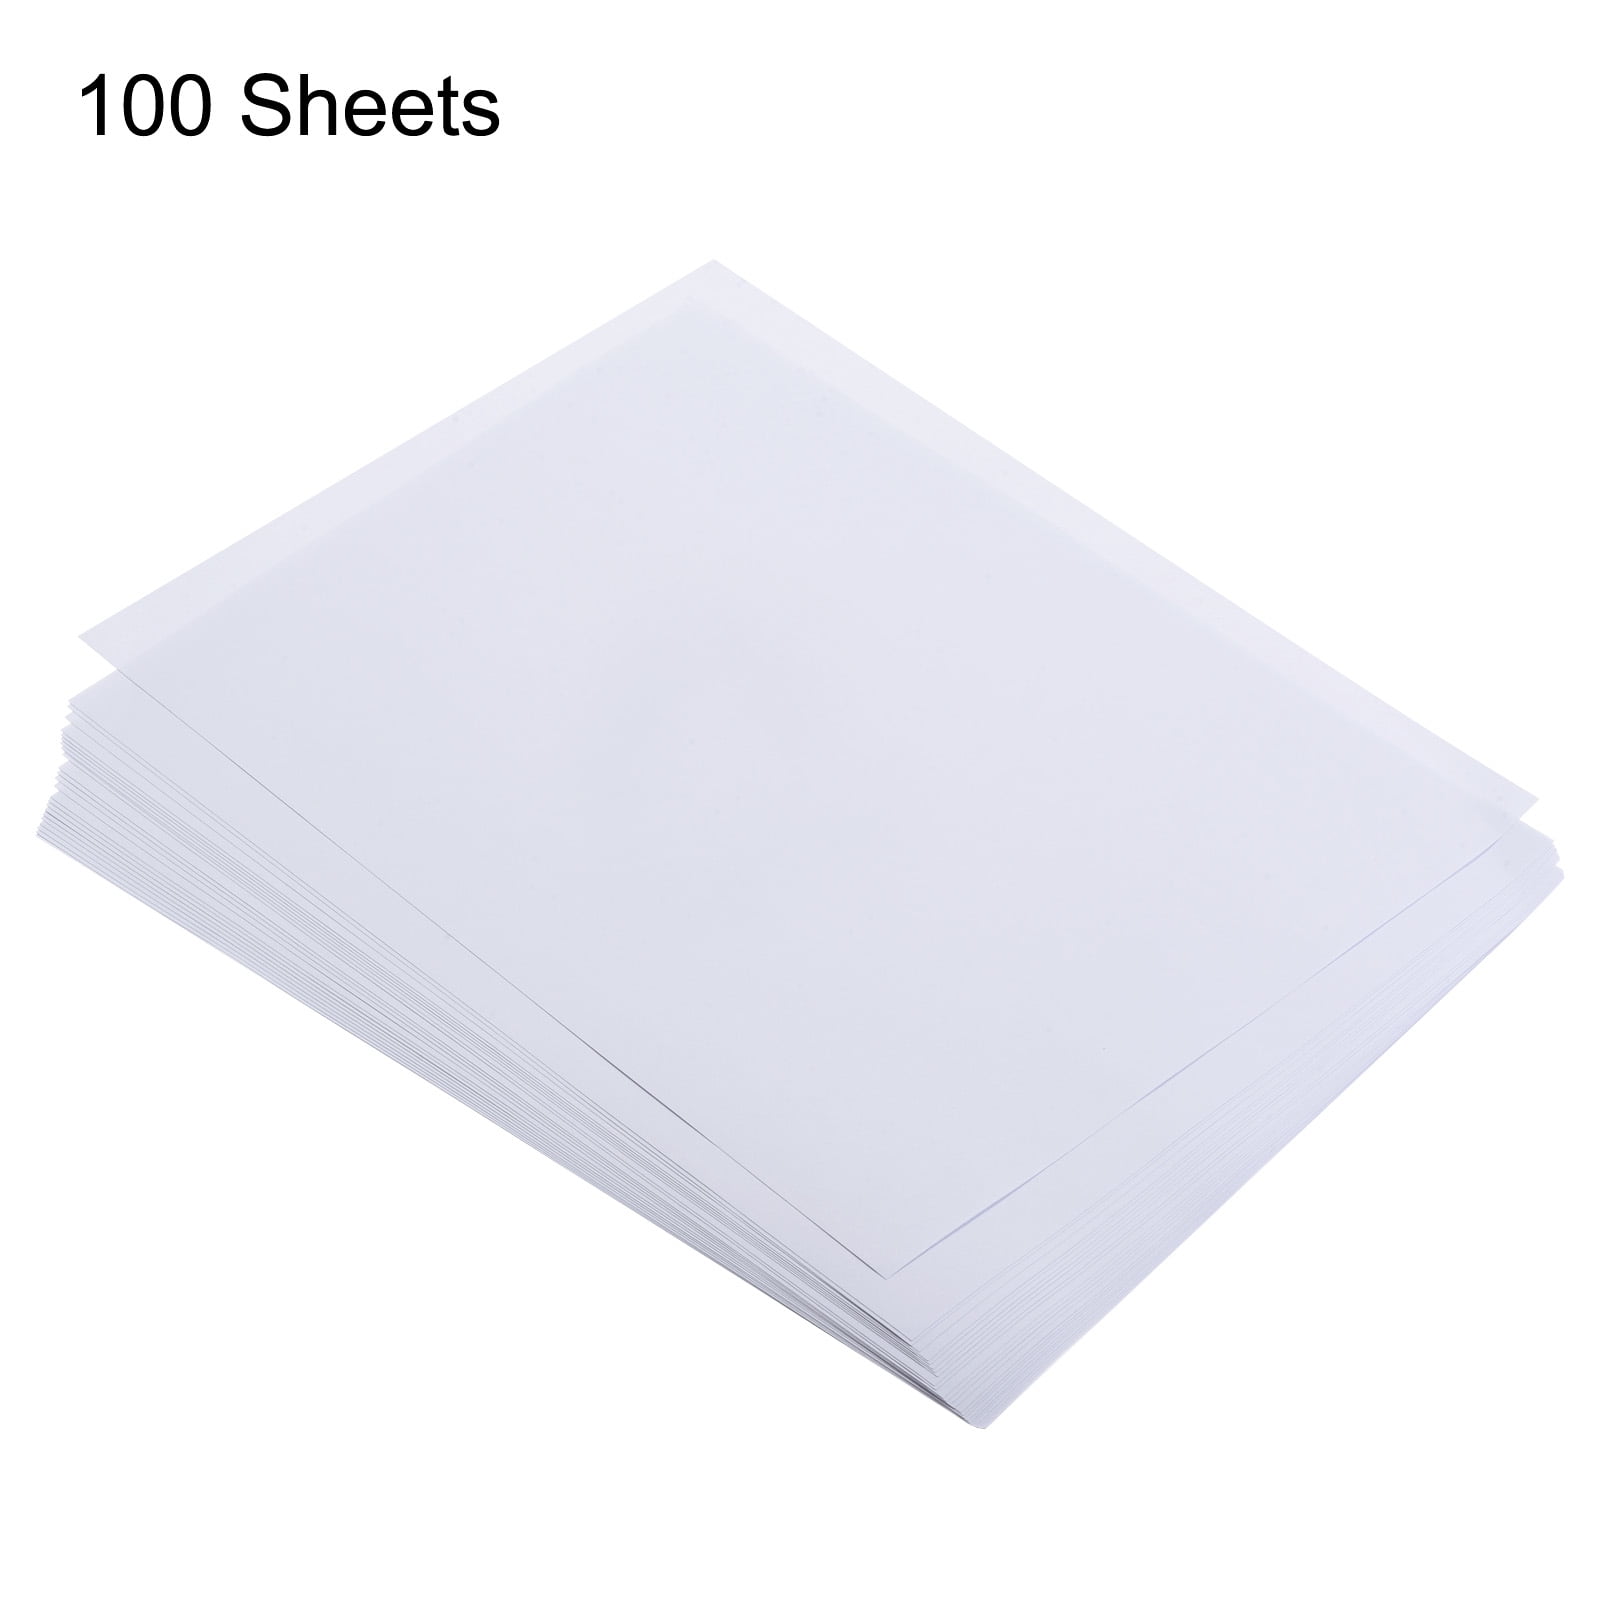 Uxcell Colored Cardstock White 17.6 lb 11.7 x 8.3 inch for Art Crafts, Office Printing 100 Sheets